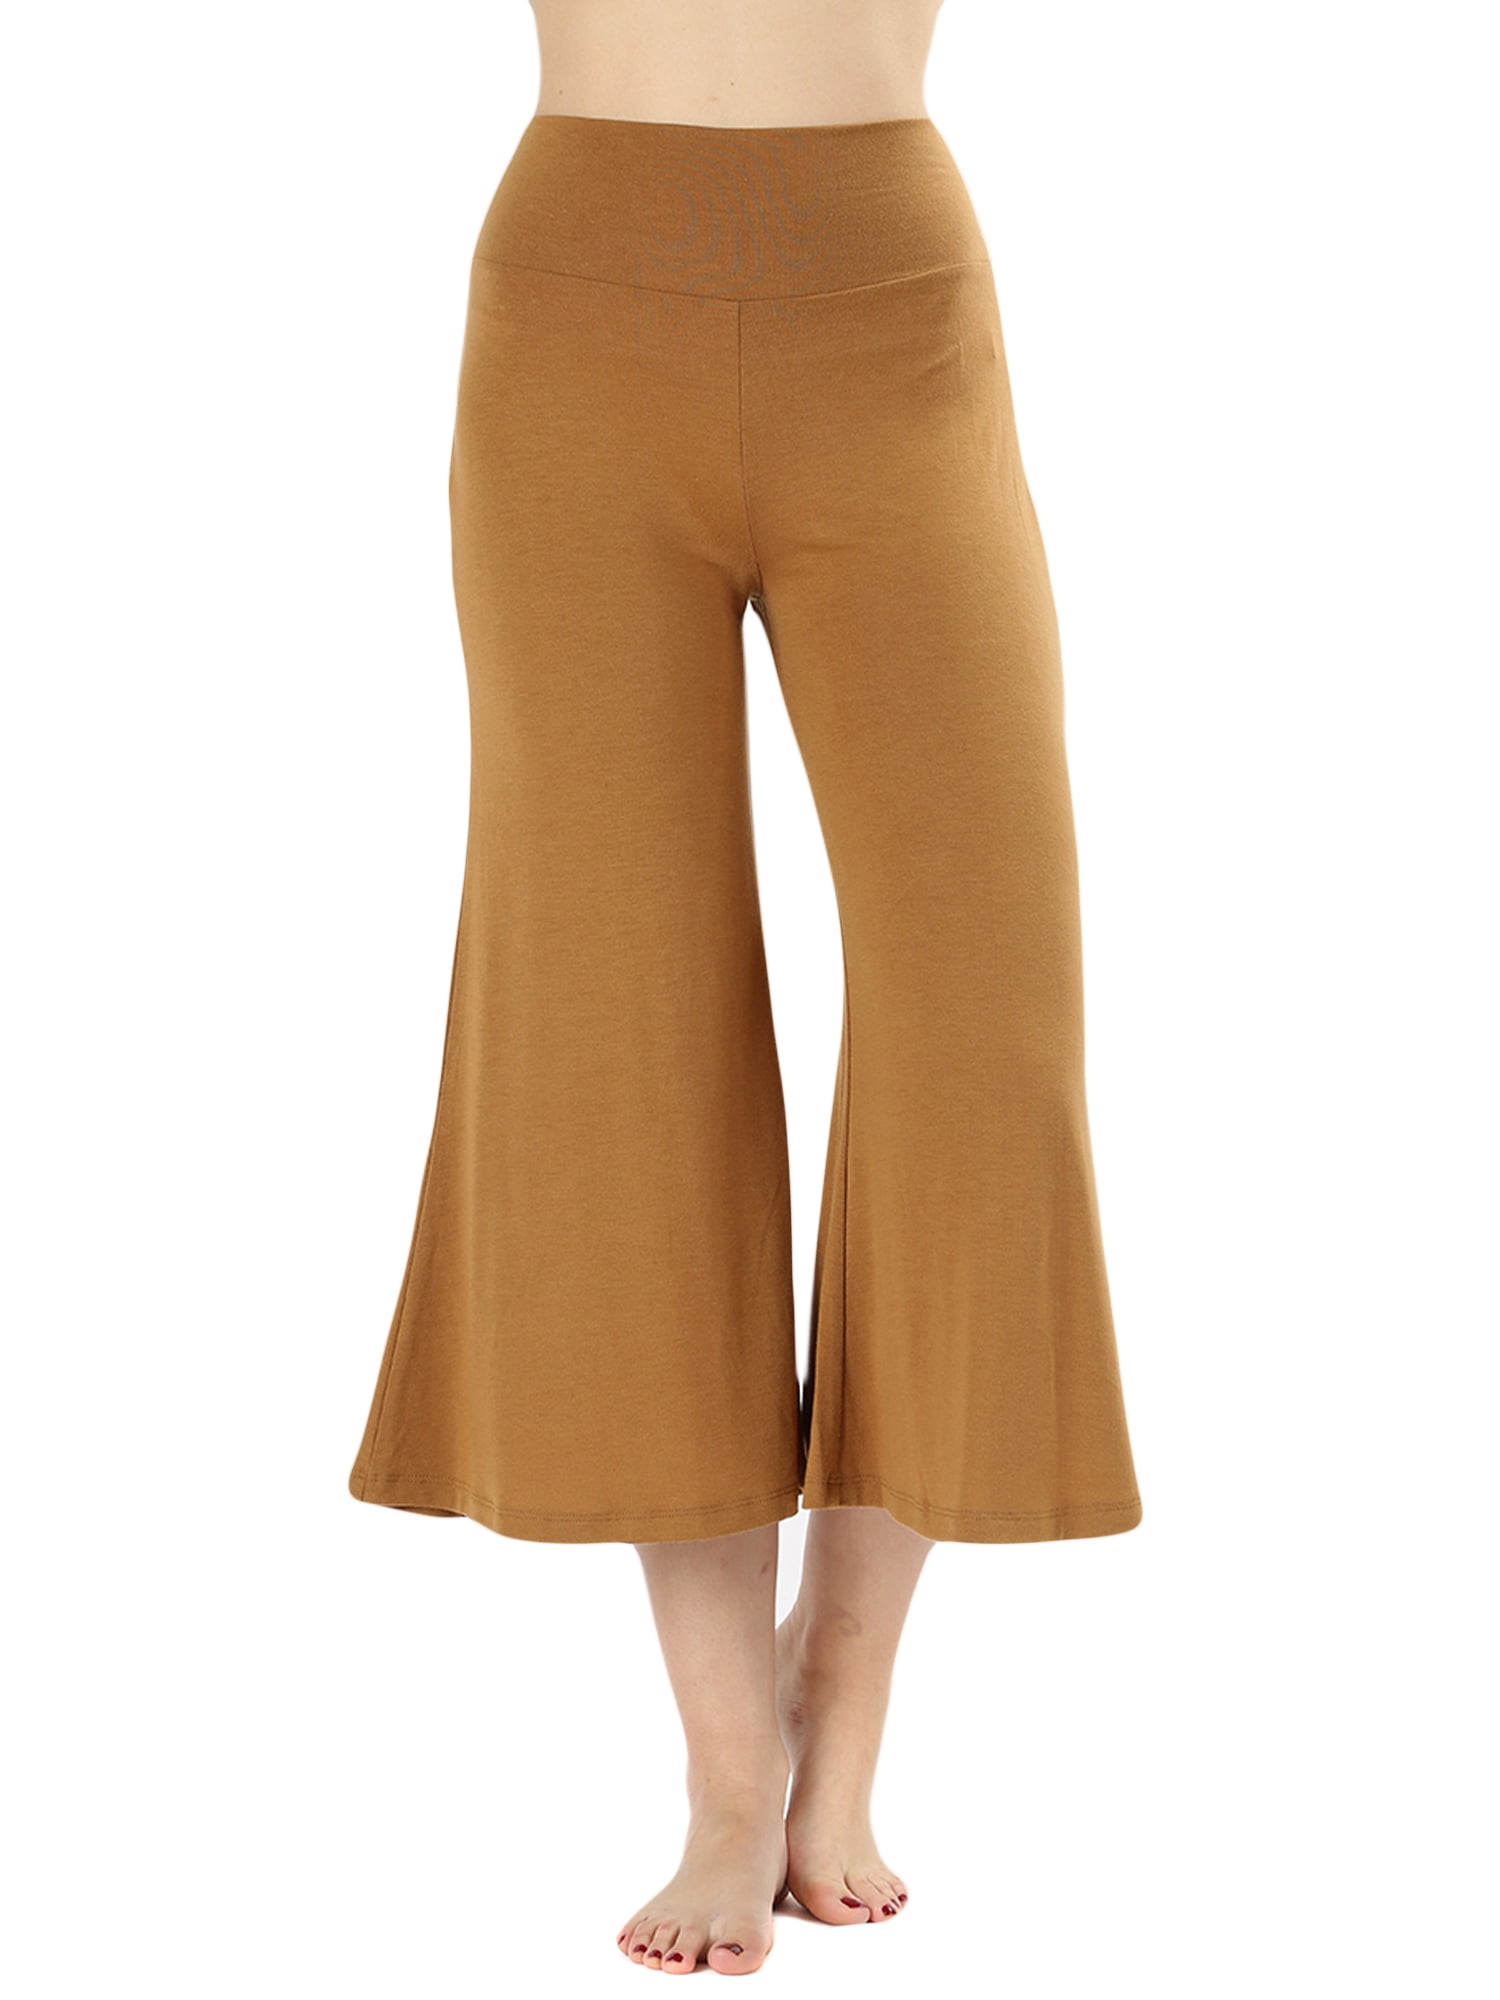 Brand Find Women's 3/4 Length Flared Culotte Trousers